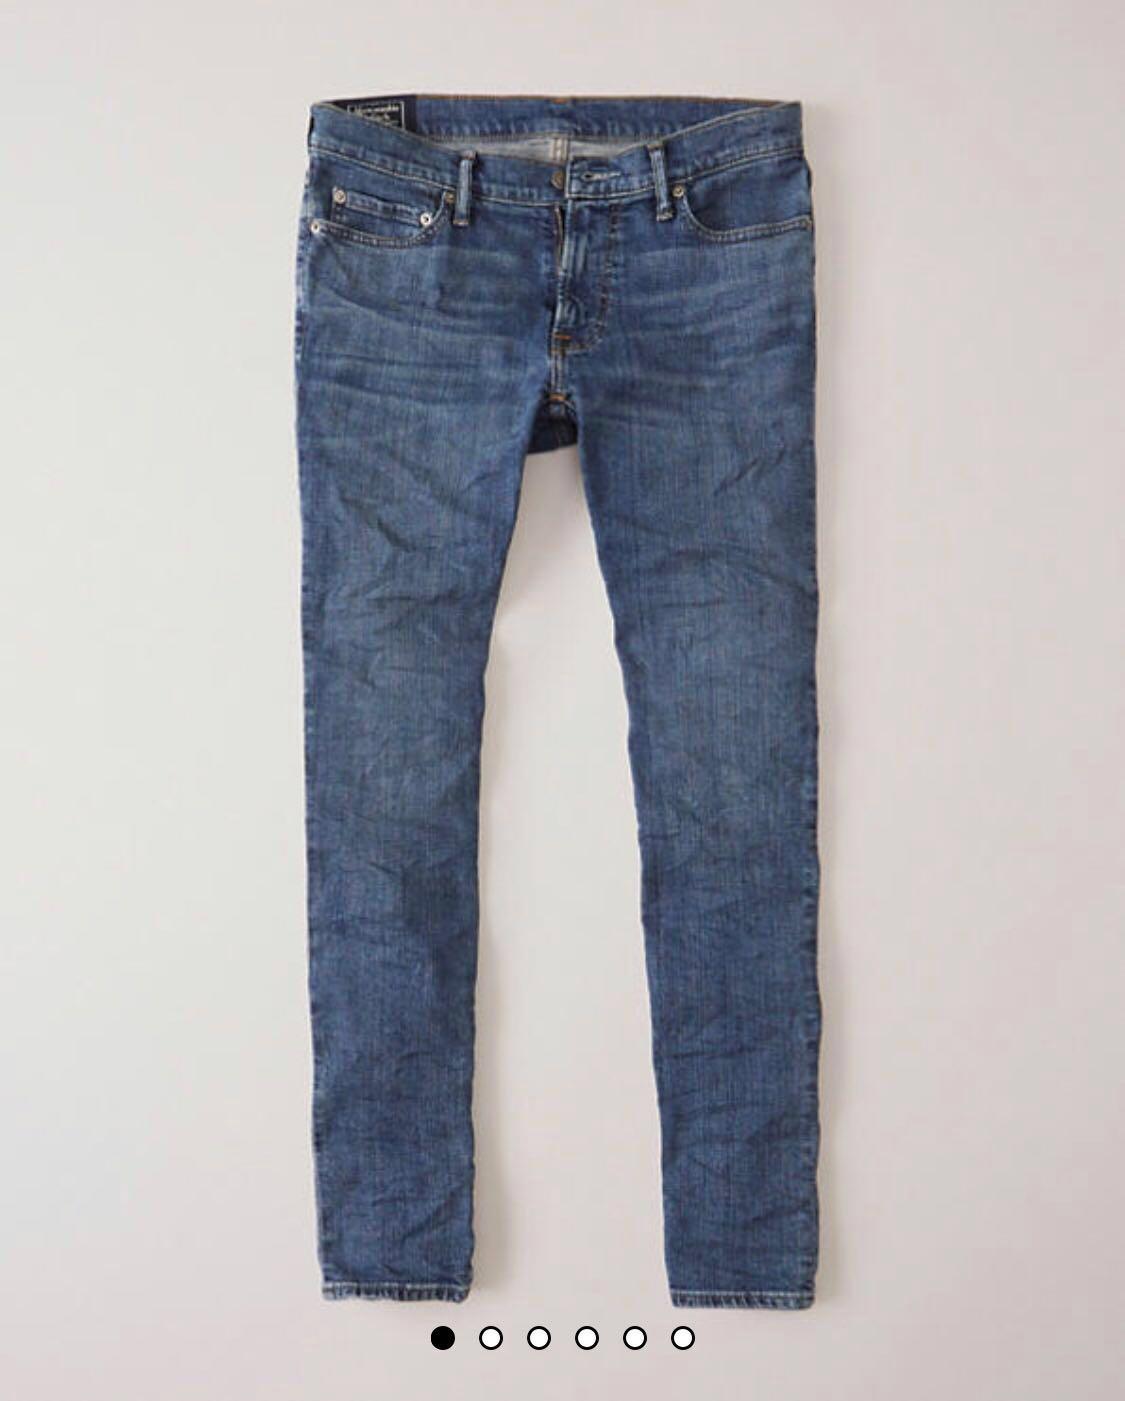 abercrombie & fitch super skinny jeans